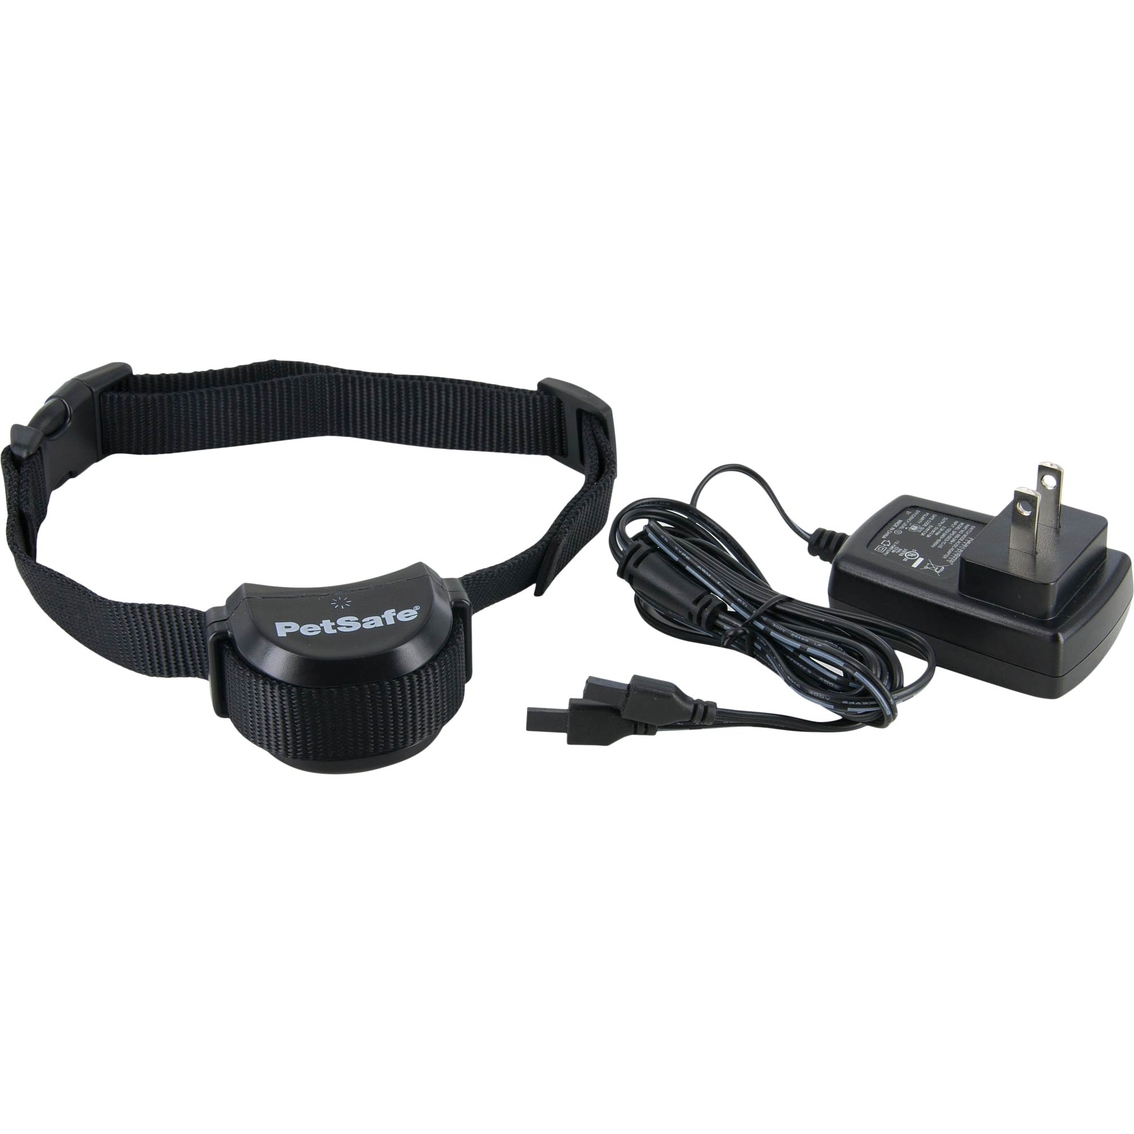 PetSafe Stay and Play Fence Receiver Collar - Image 2 of 3